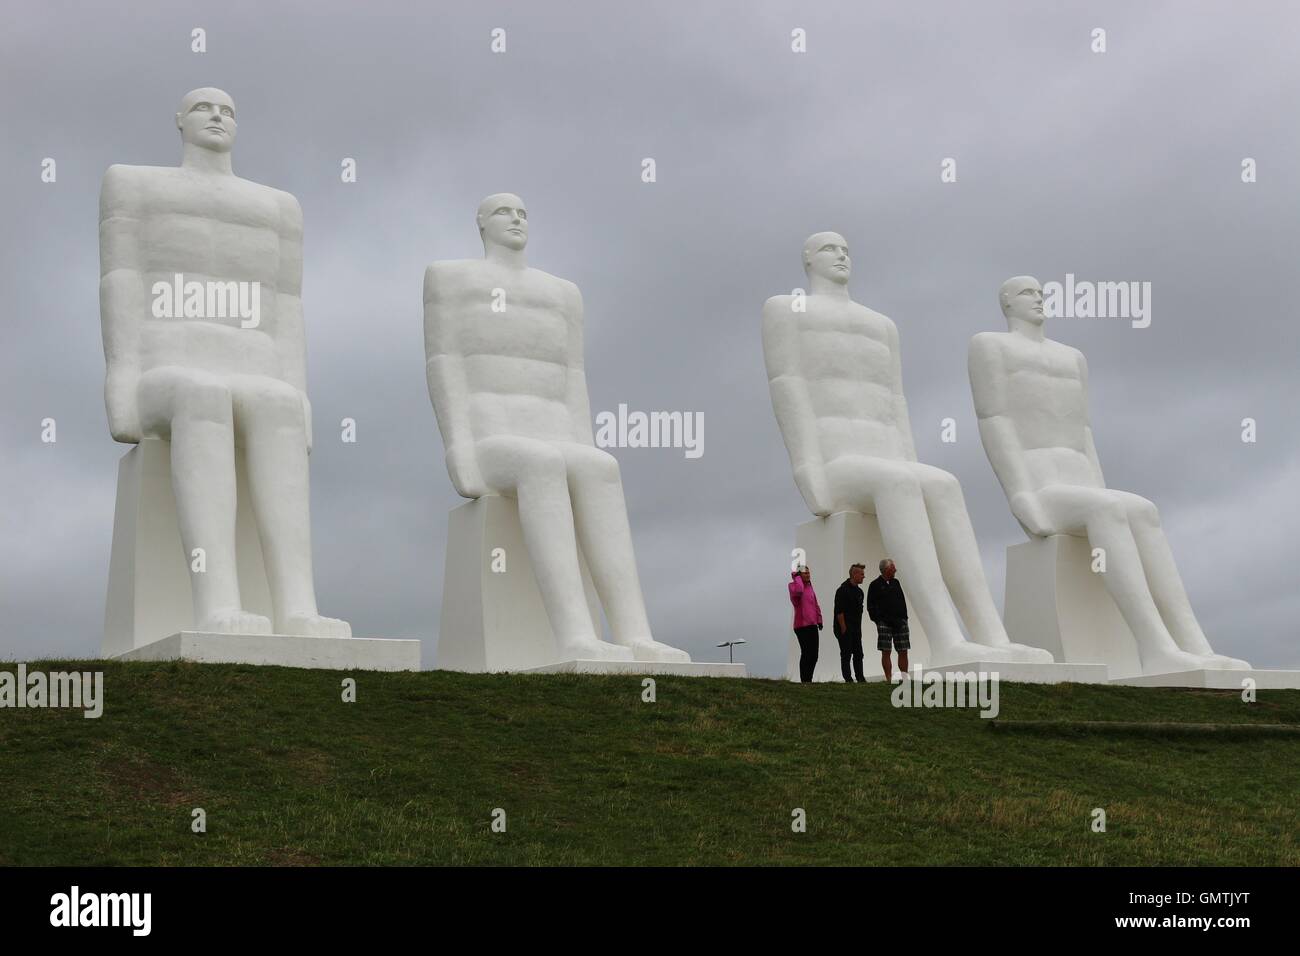 The monumental sculpture Men at Sea, located on the sea shore next to Esbjerg. It is 30 feet or 9 metres tall. Denmark, Scandinavia, Europe. Stock Photo